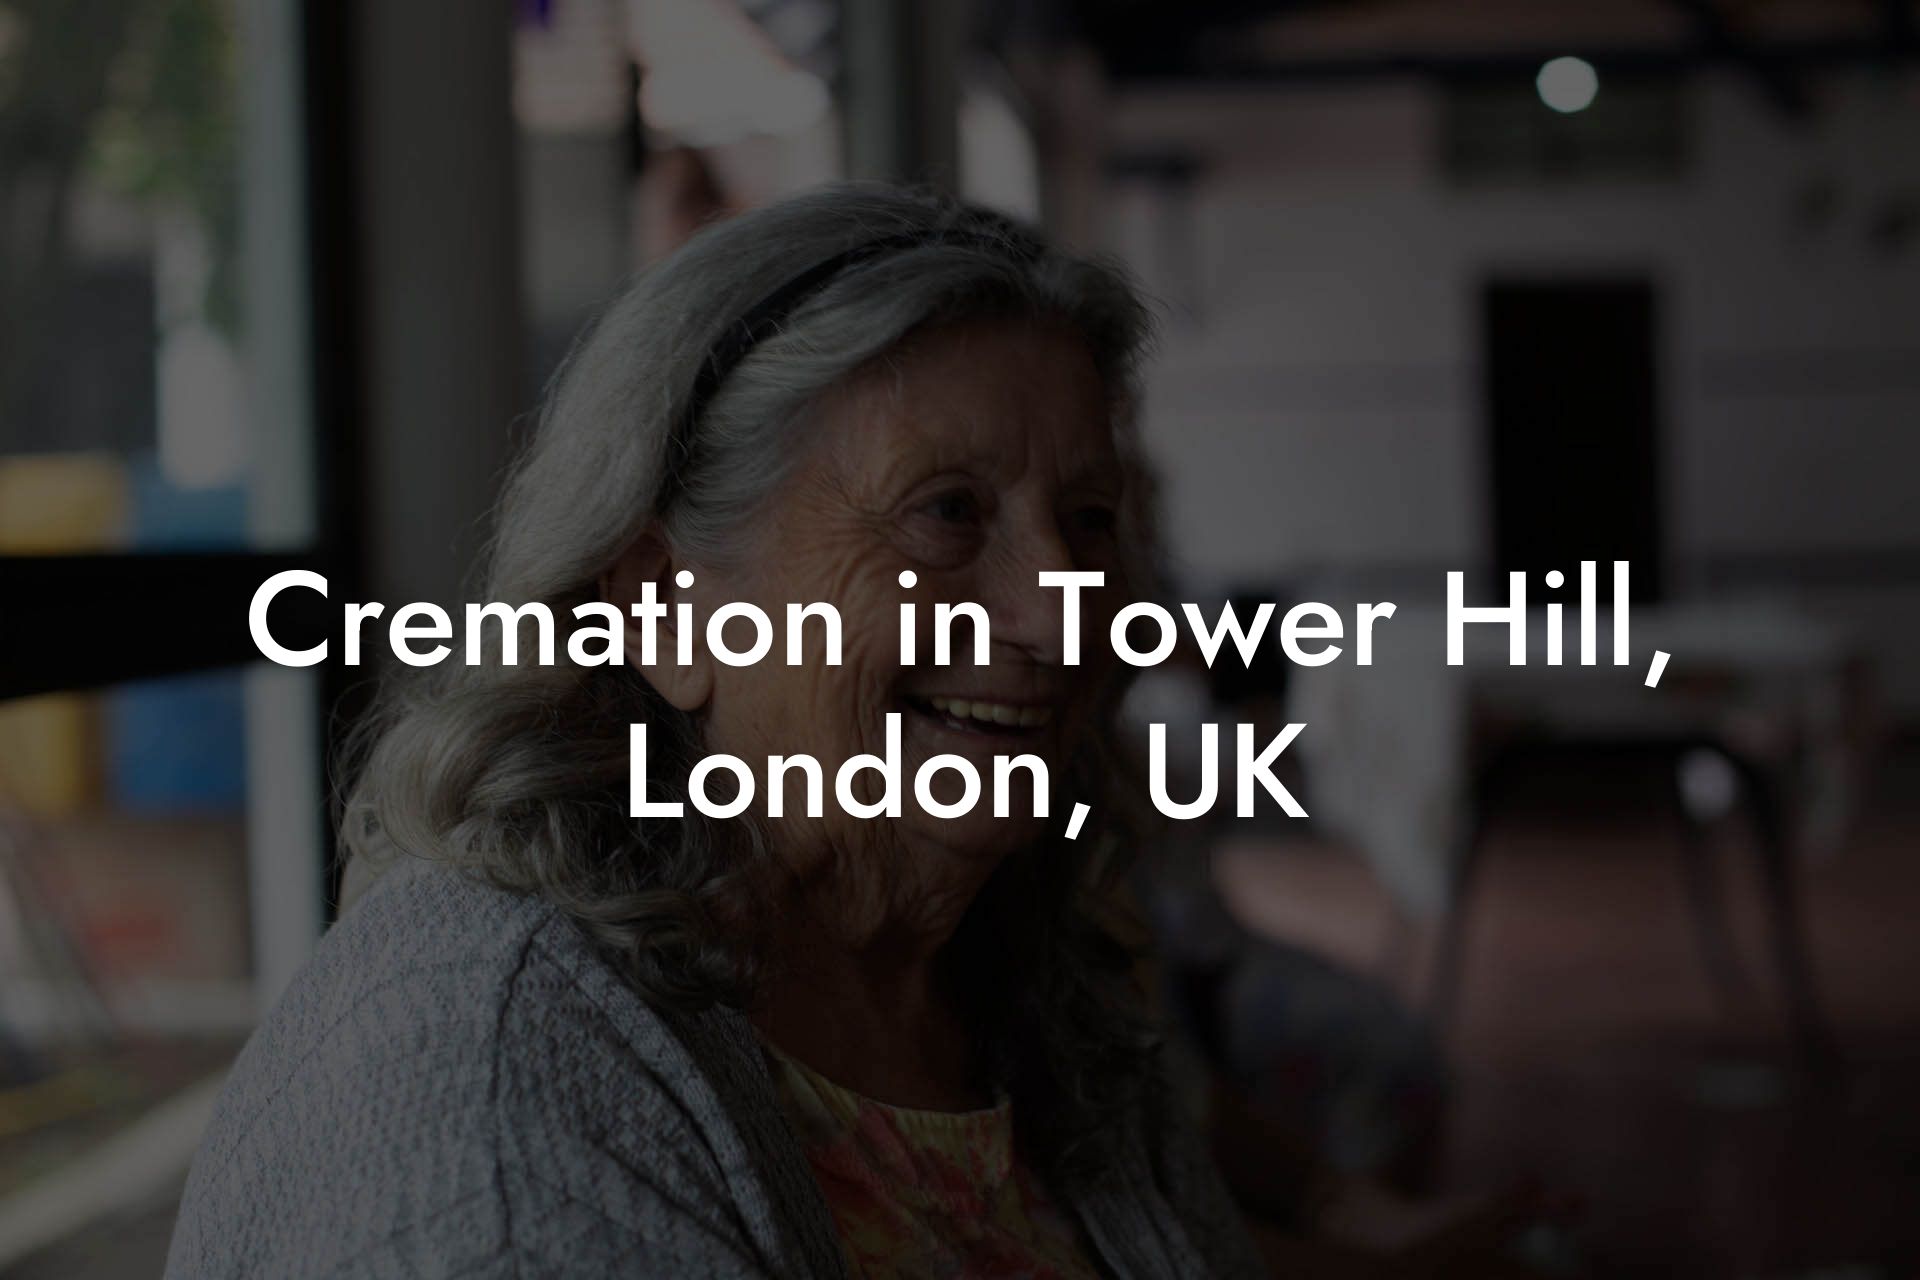 Cremation in Tower Hill, London, UK